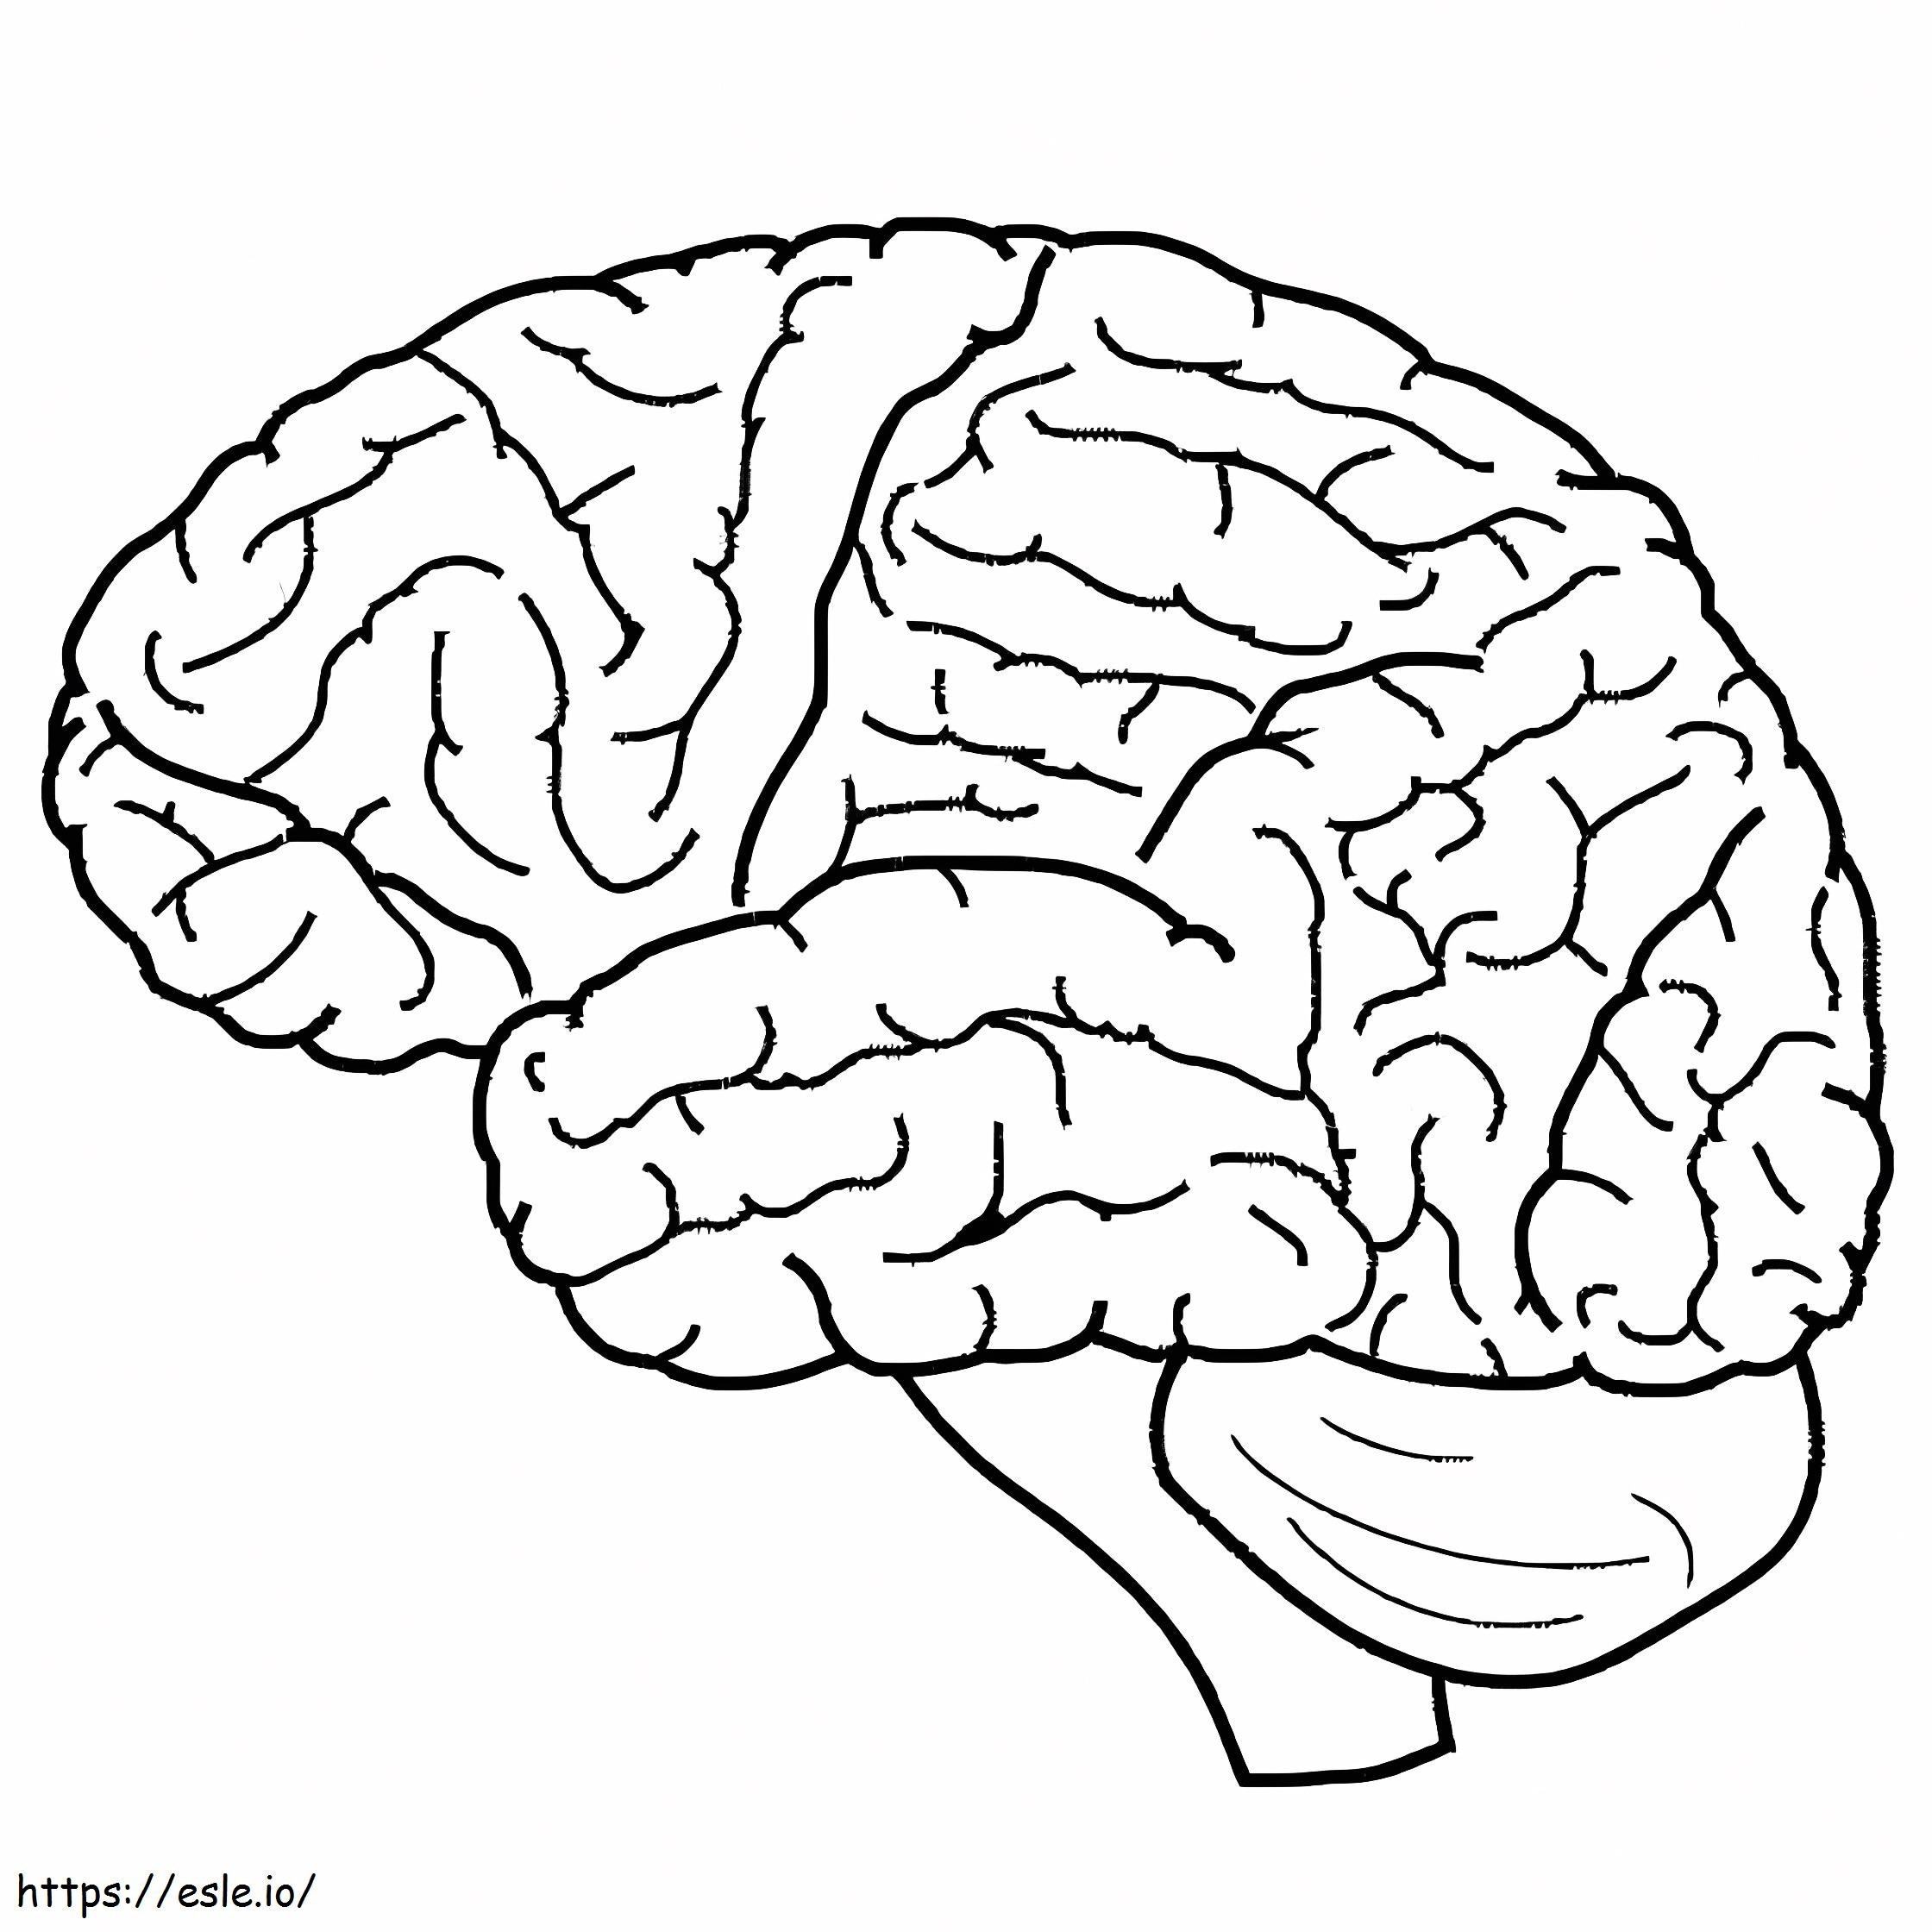 Normal Human Brain coloring page